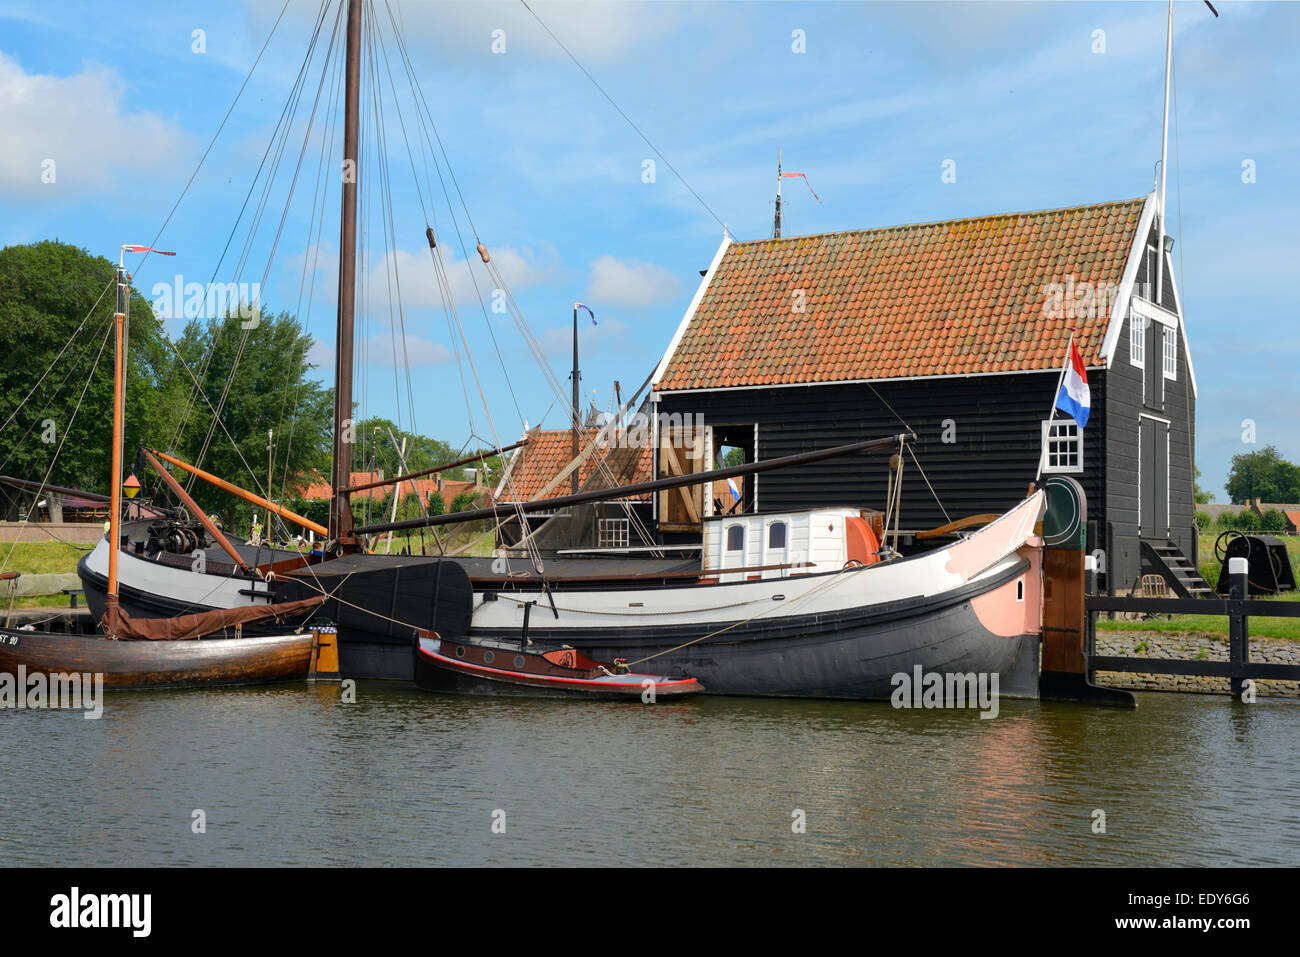 Boats in a fishing port at Zuiderzee open air museum, Lake Ijssel, Enkhuizen, North Holland, Netherlands, Europe Stock Photo